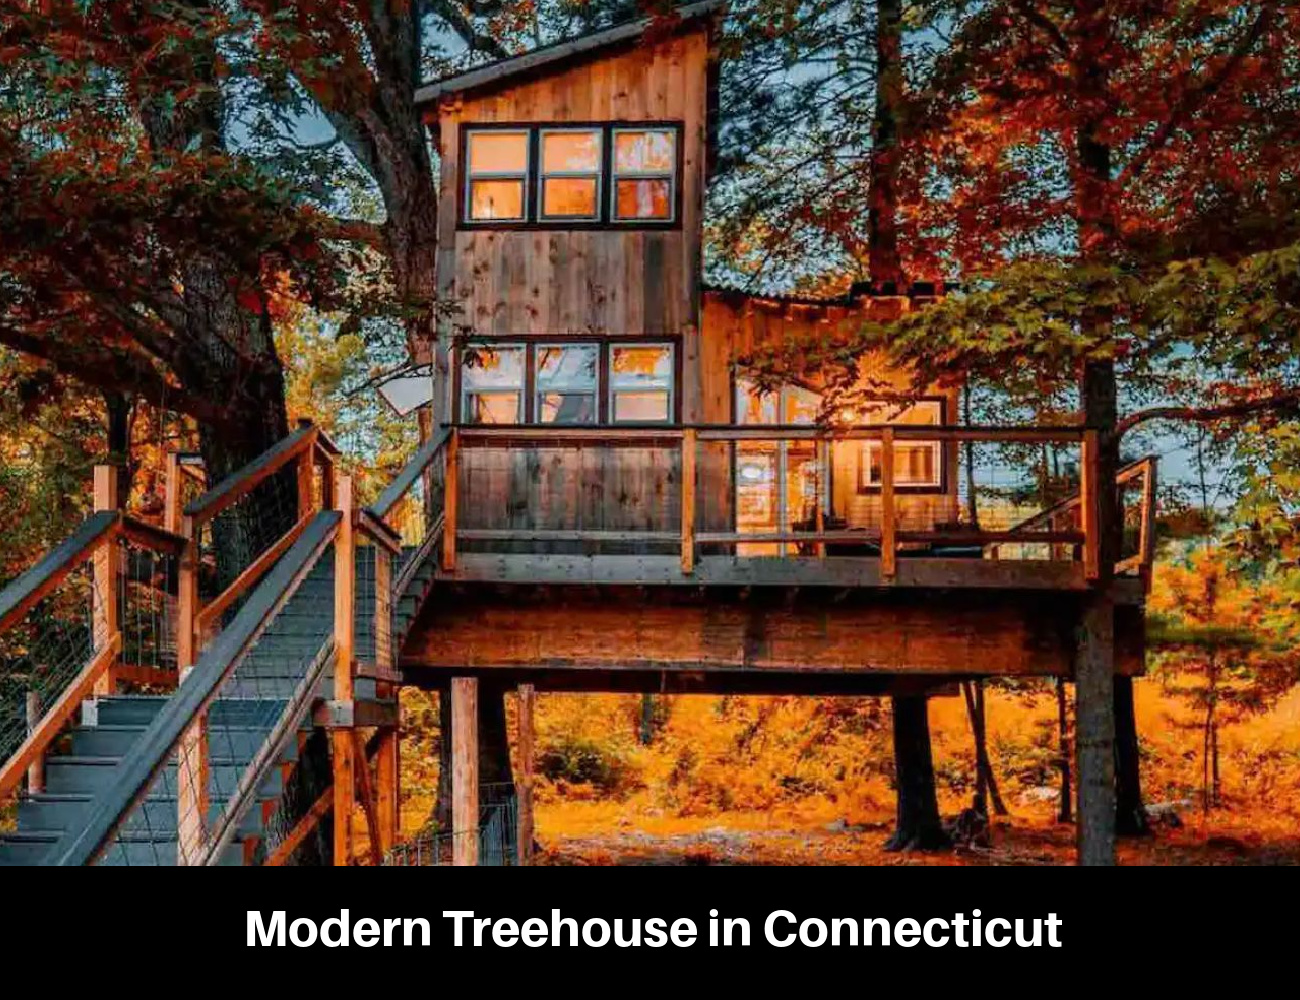 Modern Treehouse in Connecticut